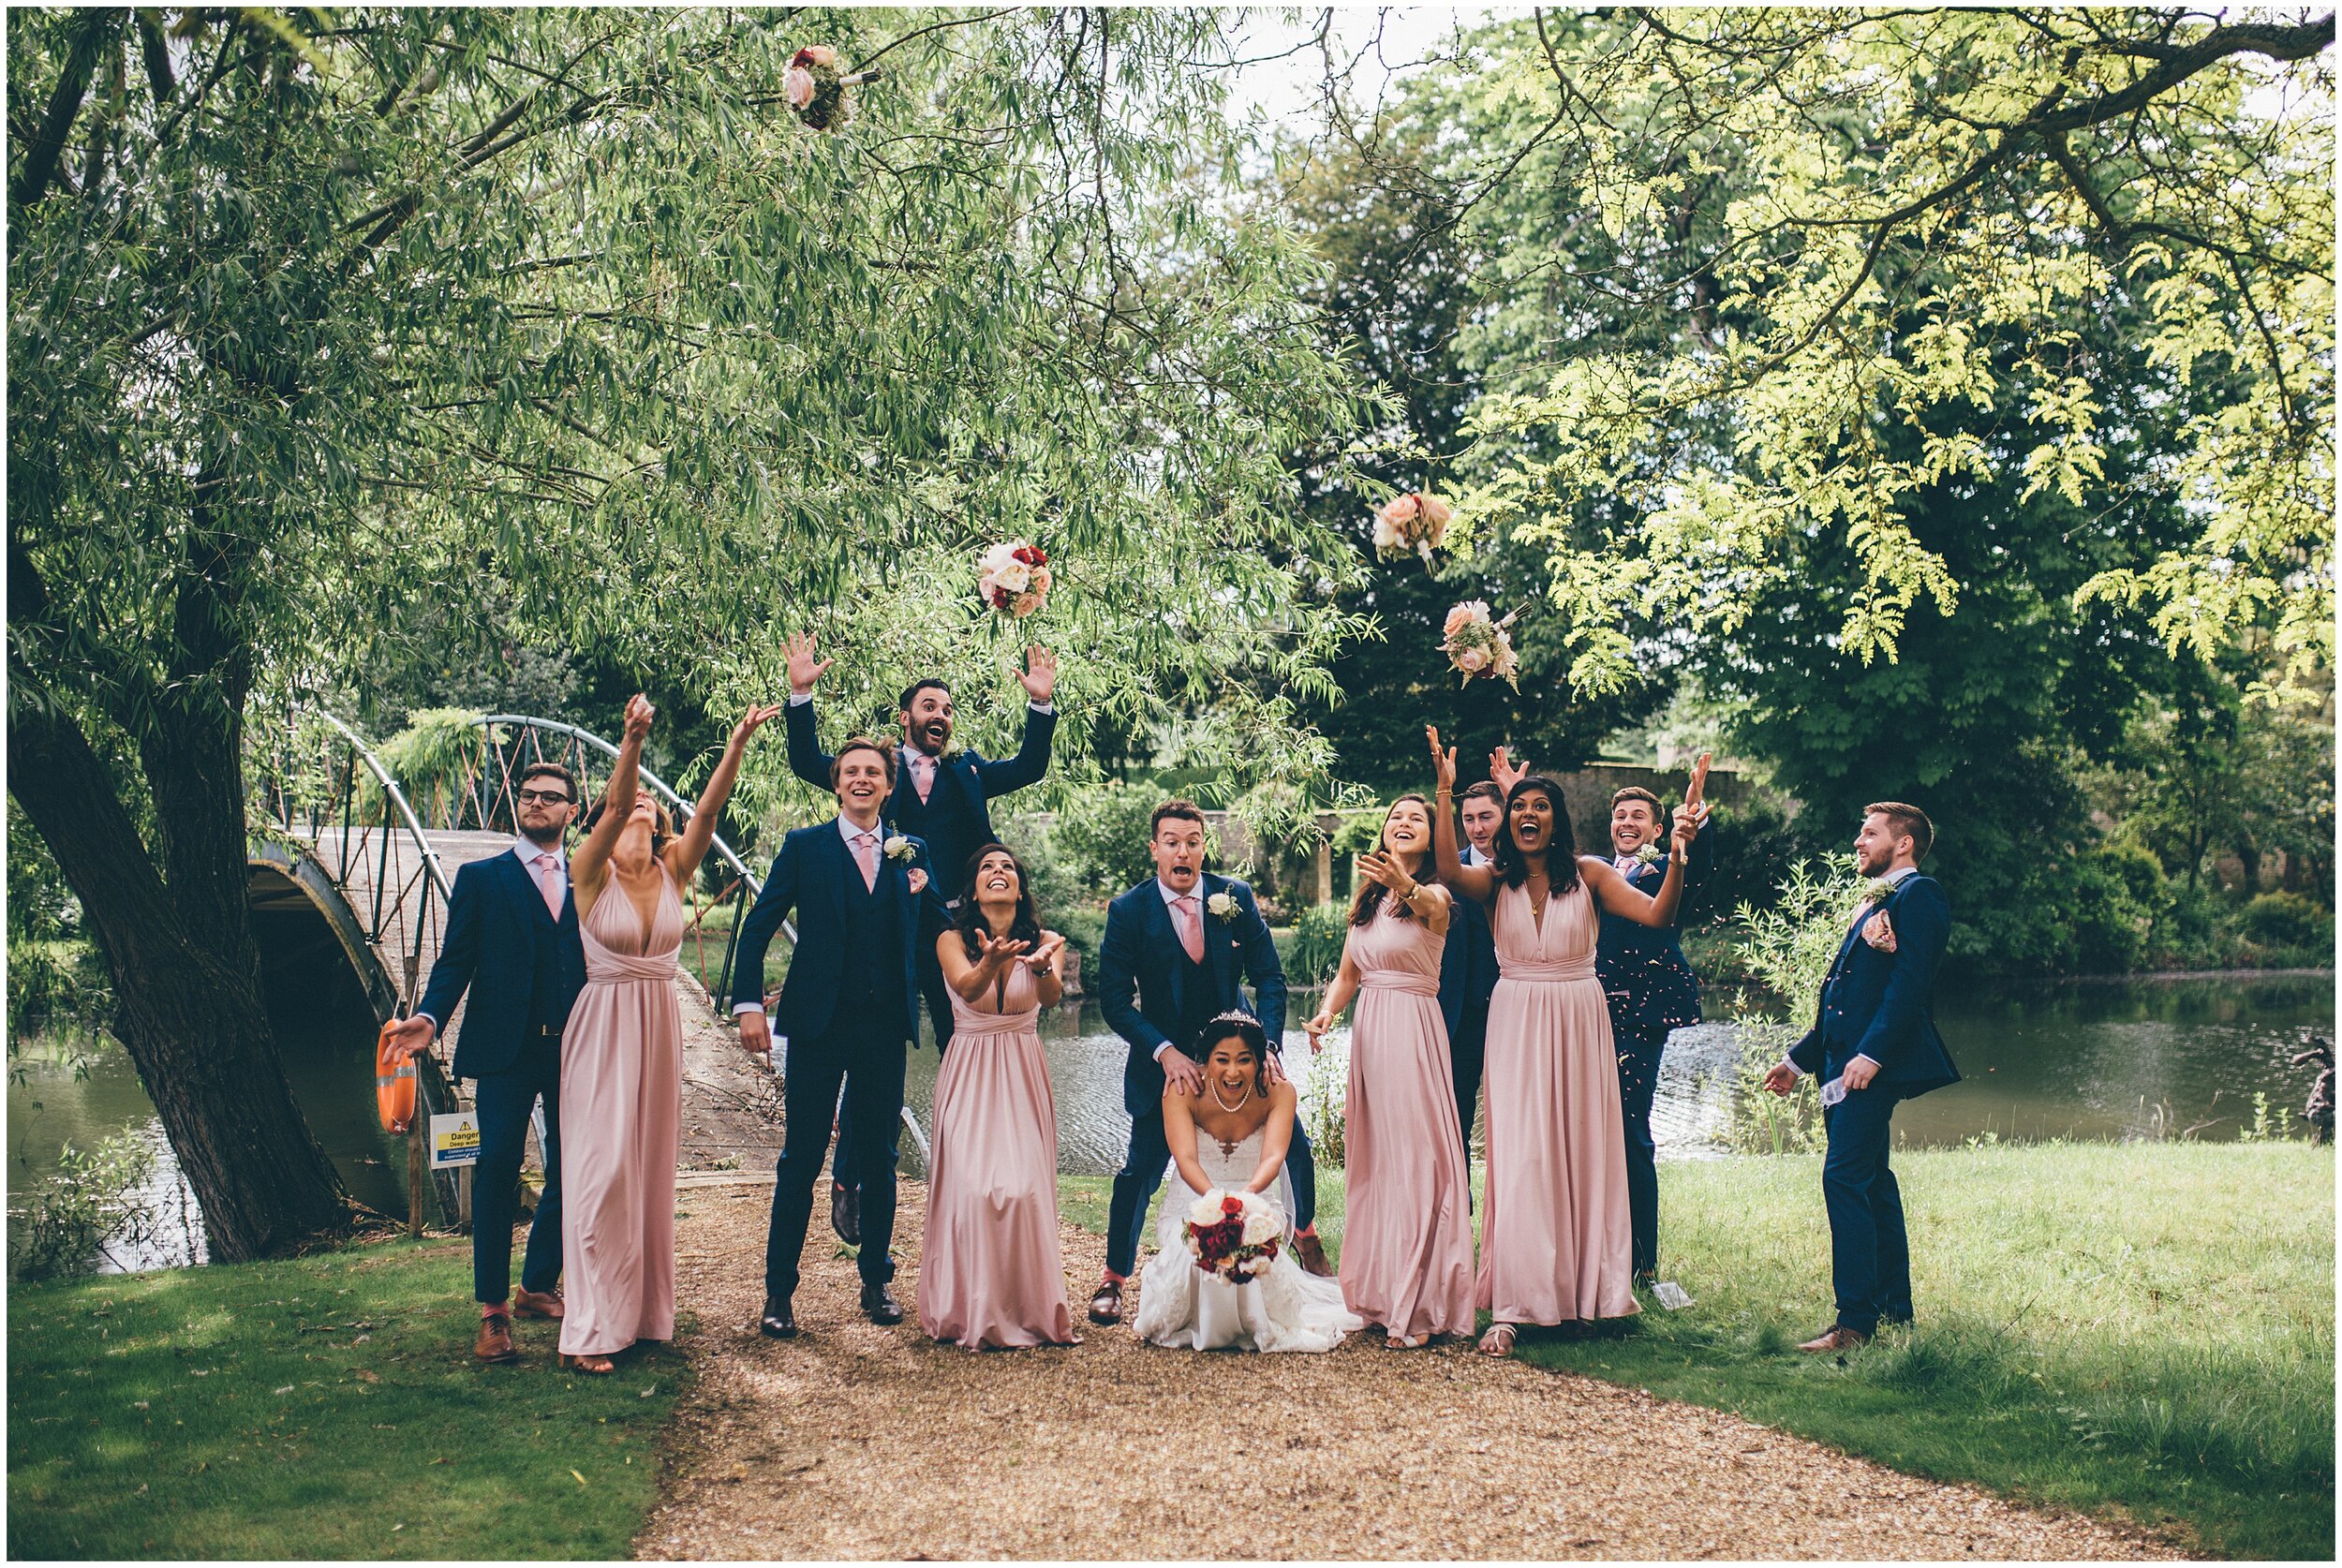 Bridal party with bridesmaids and groomsmen having fun and laughing.